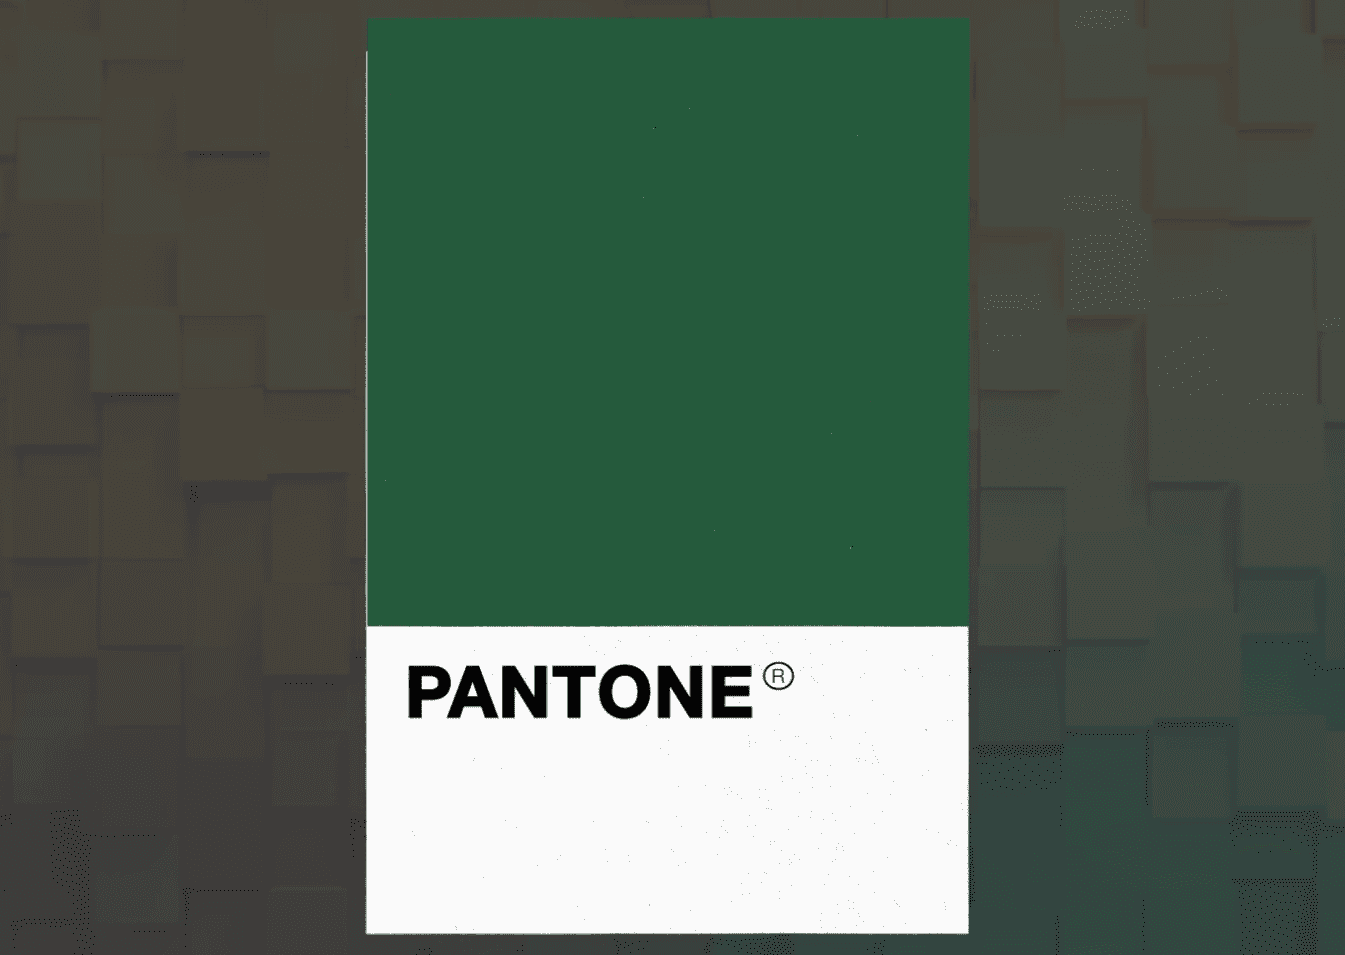 PANTONE: How one company owns color